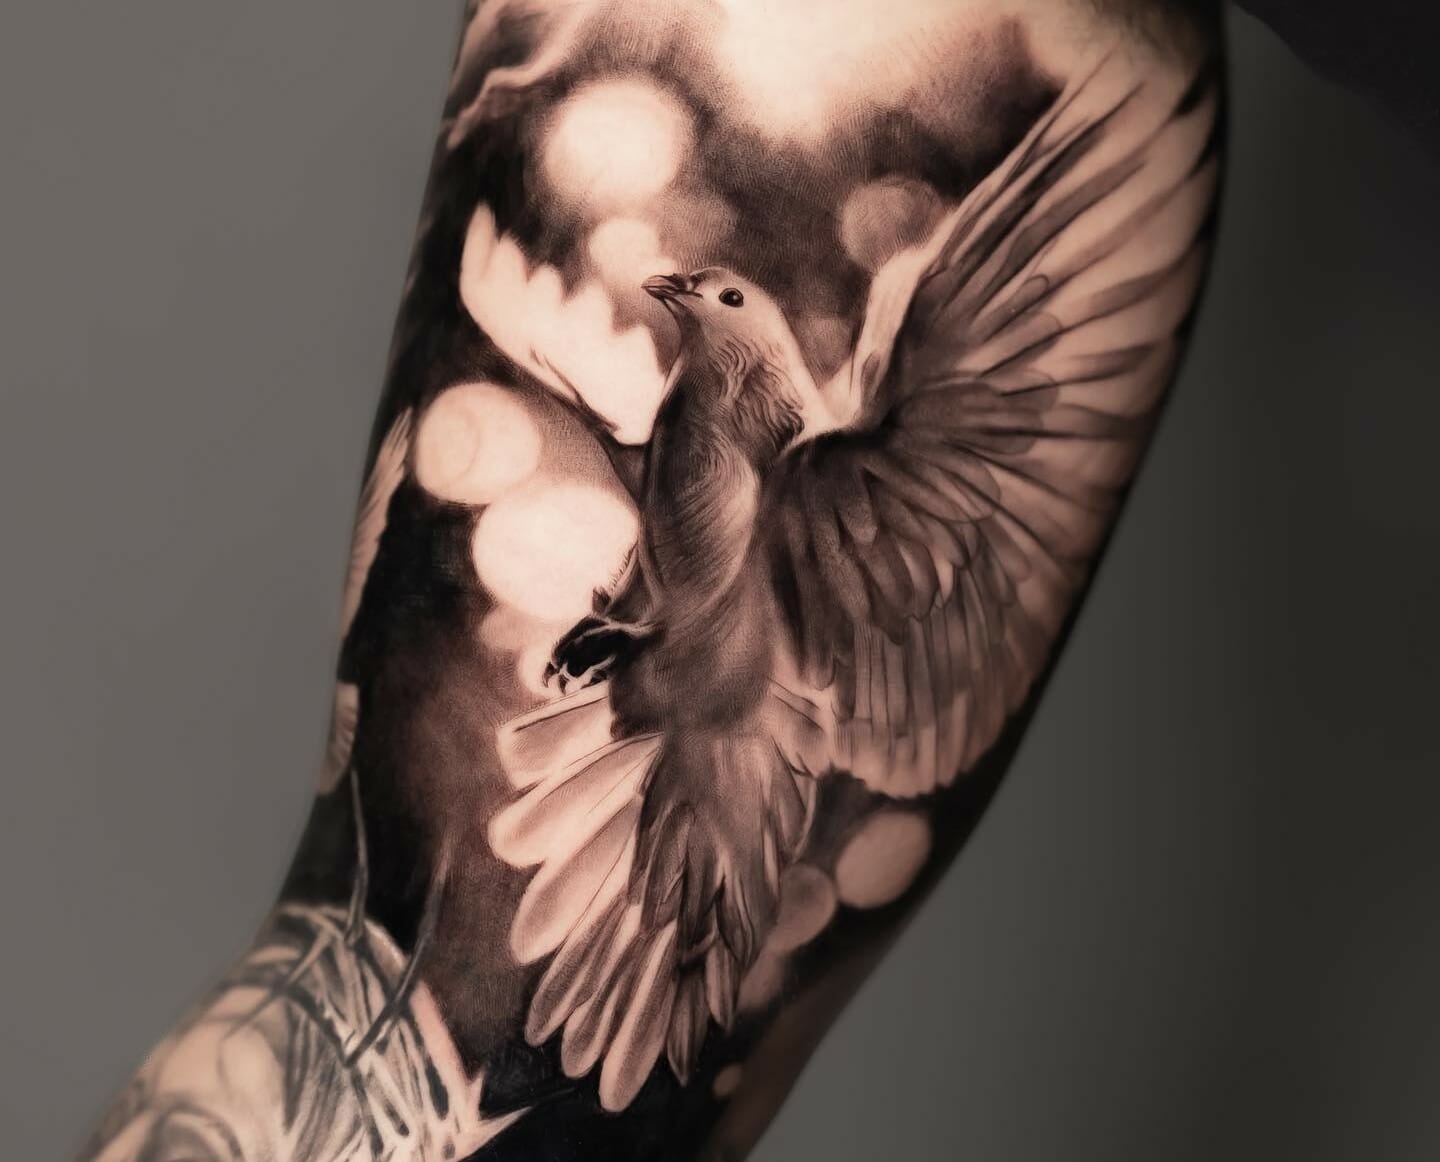 101 Best Realistic Pigeon Tattoo Ideas That Will Blow Your Mind

+2023